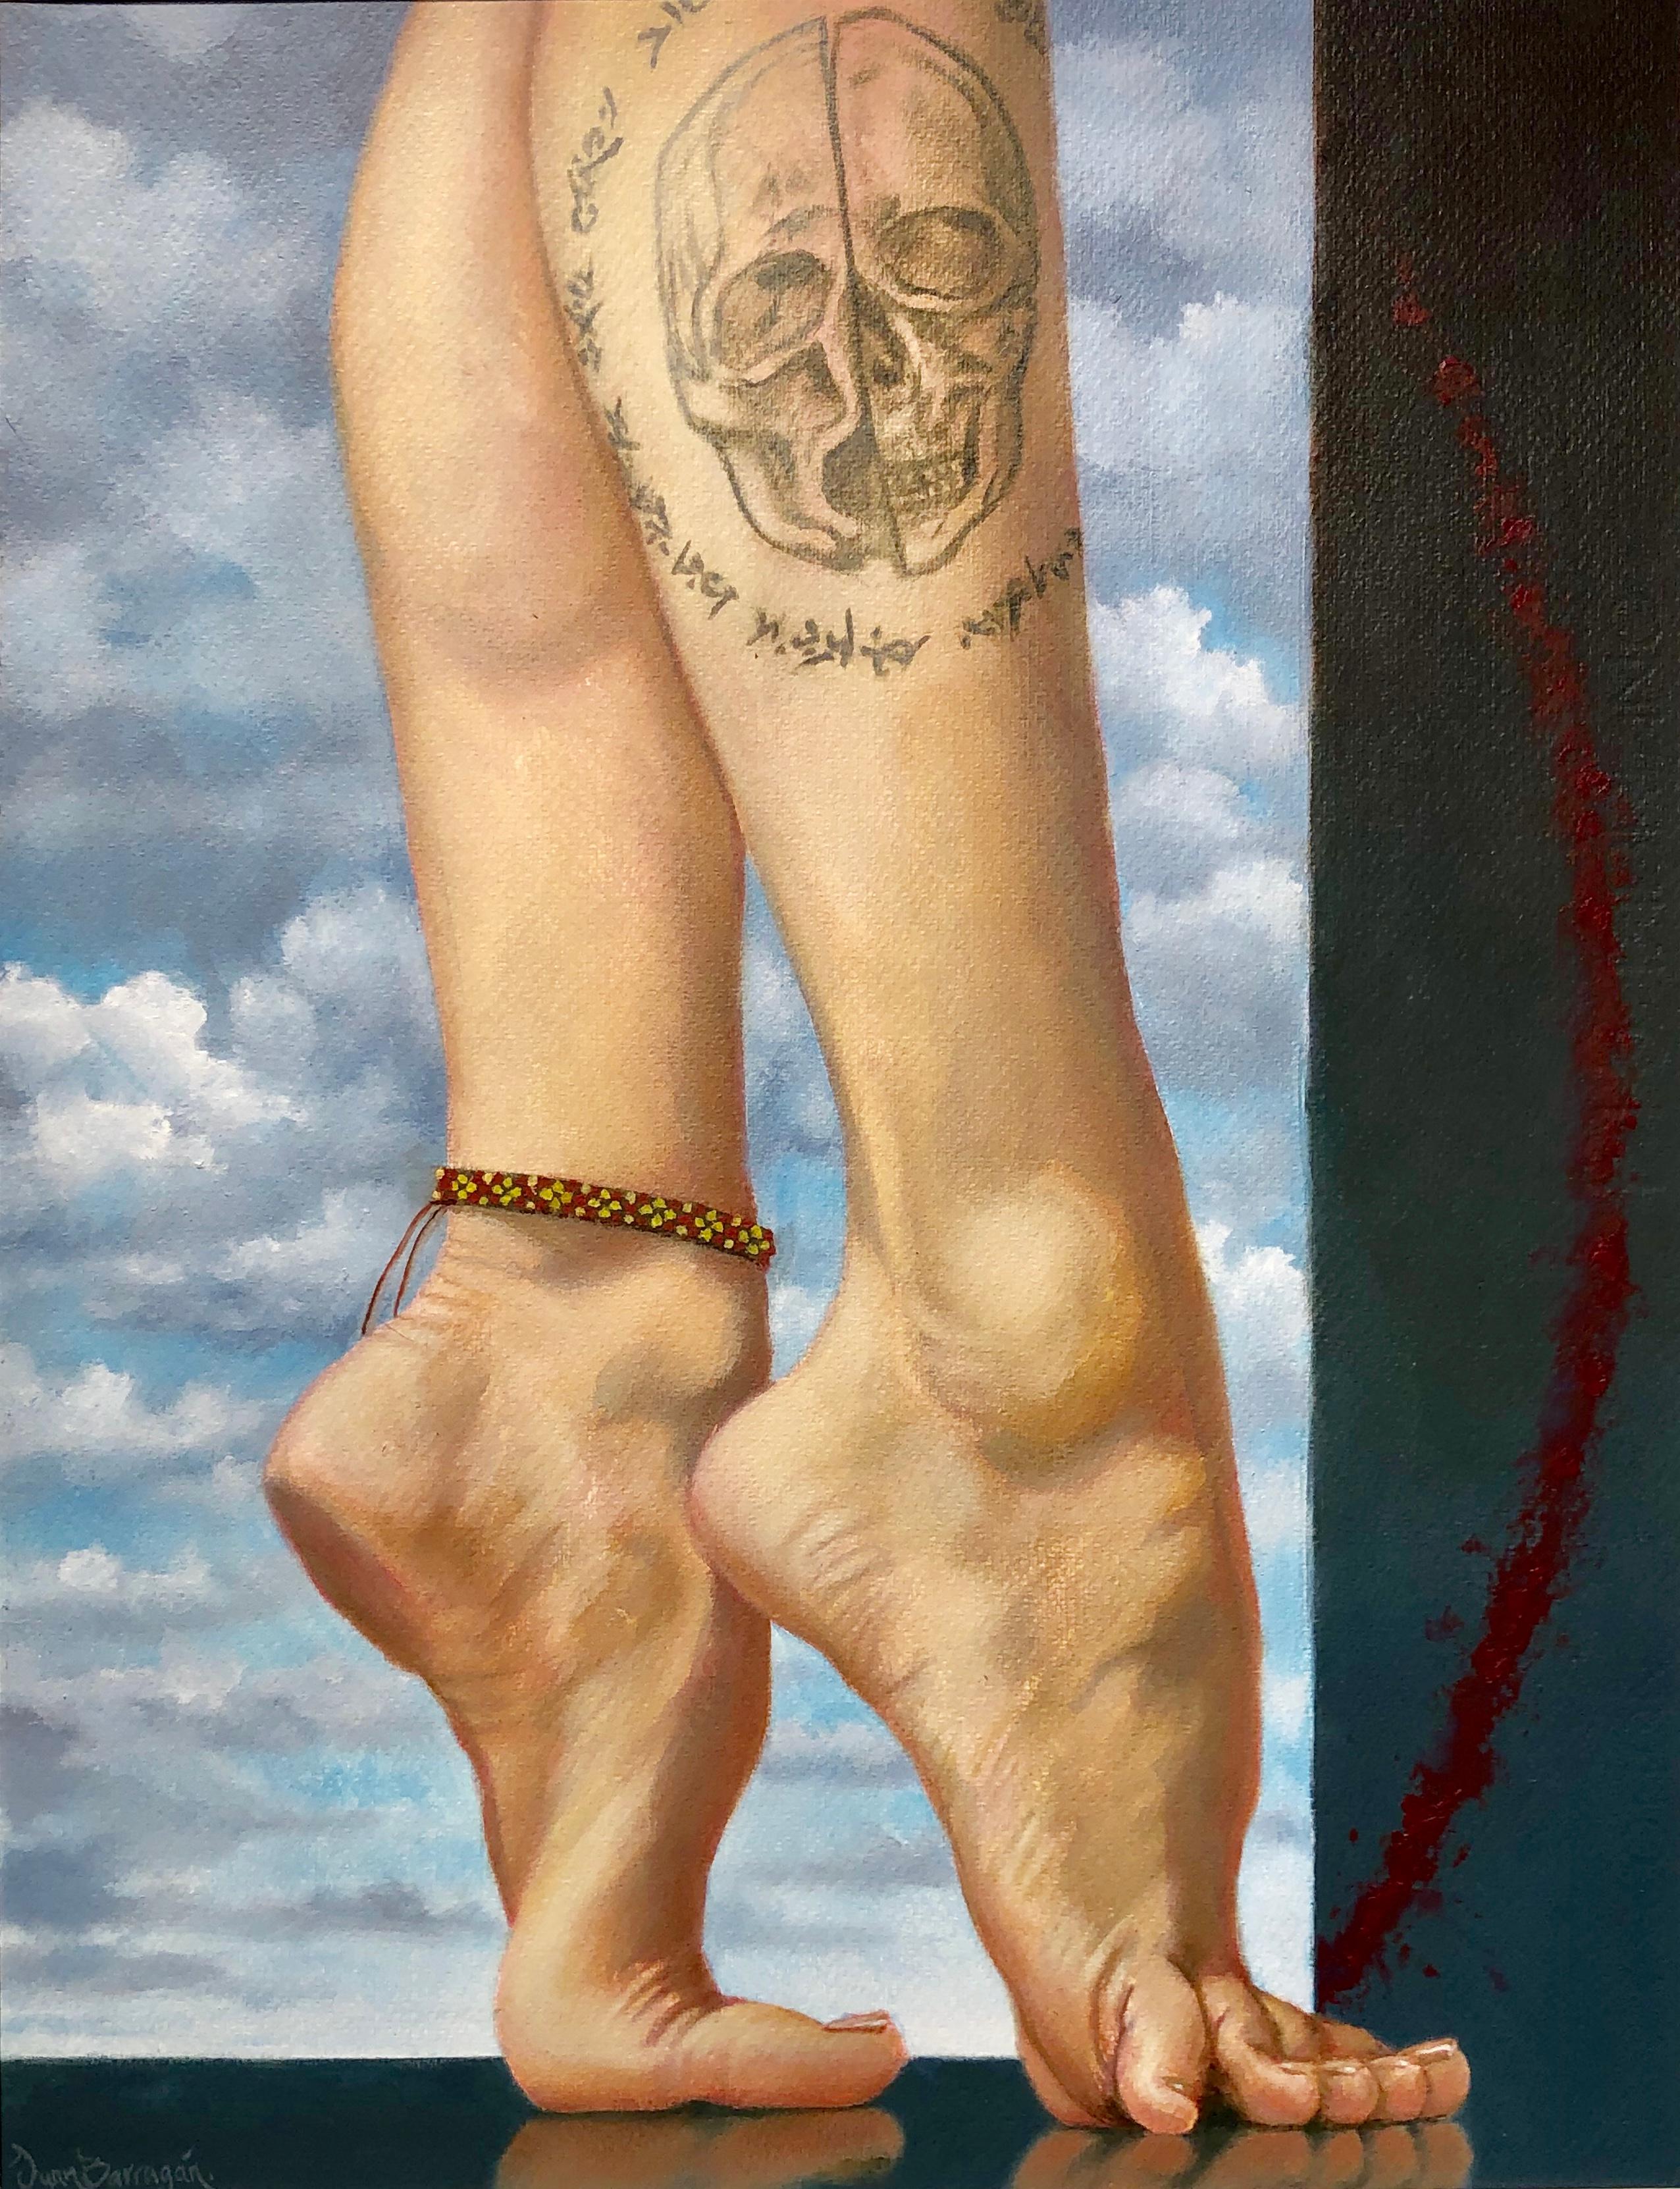 Juan Barragán Figurative Painting - Exegesis - Dancer's Legs Emblazoned with a Skull Tattoo, Oil & Acrylic on Paper